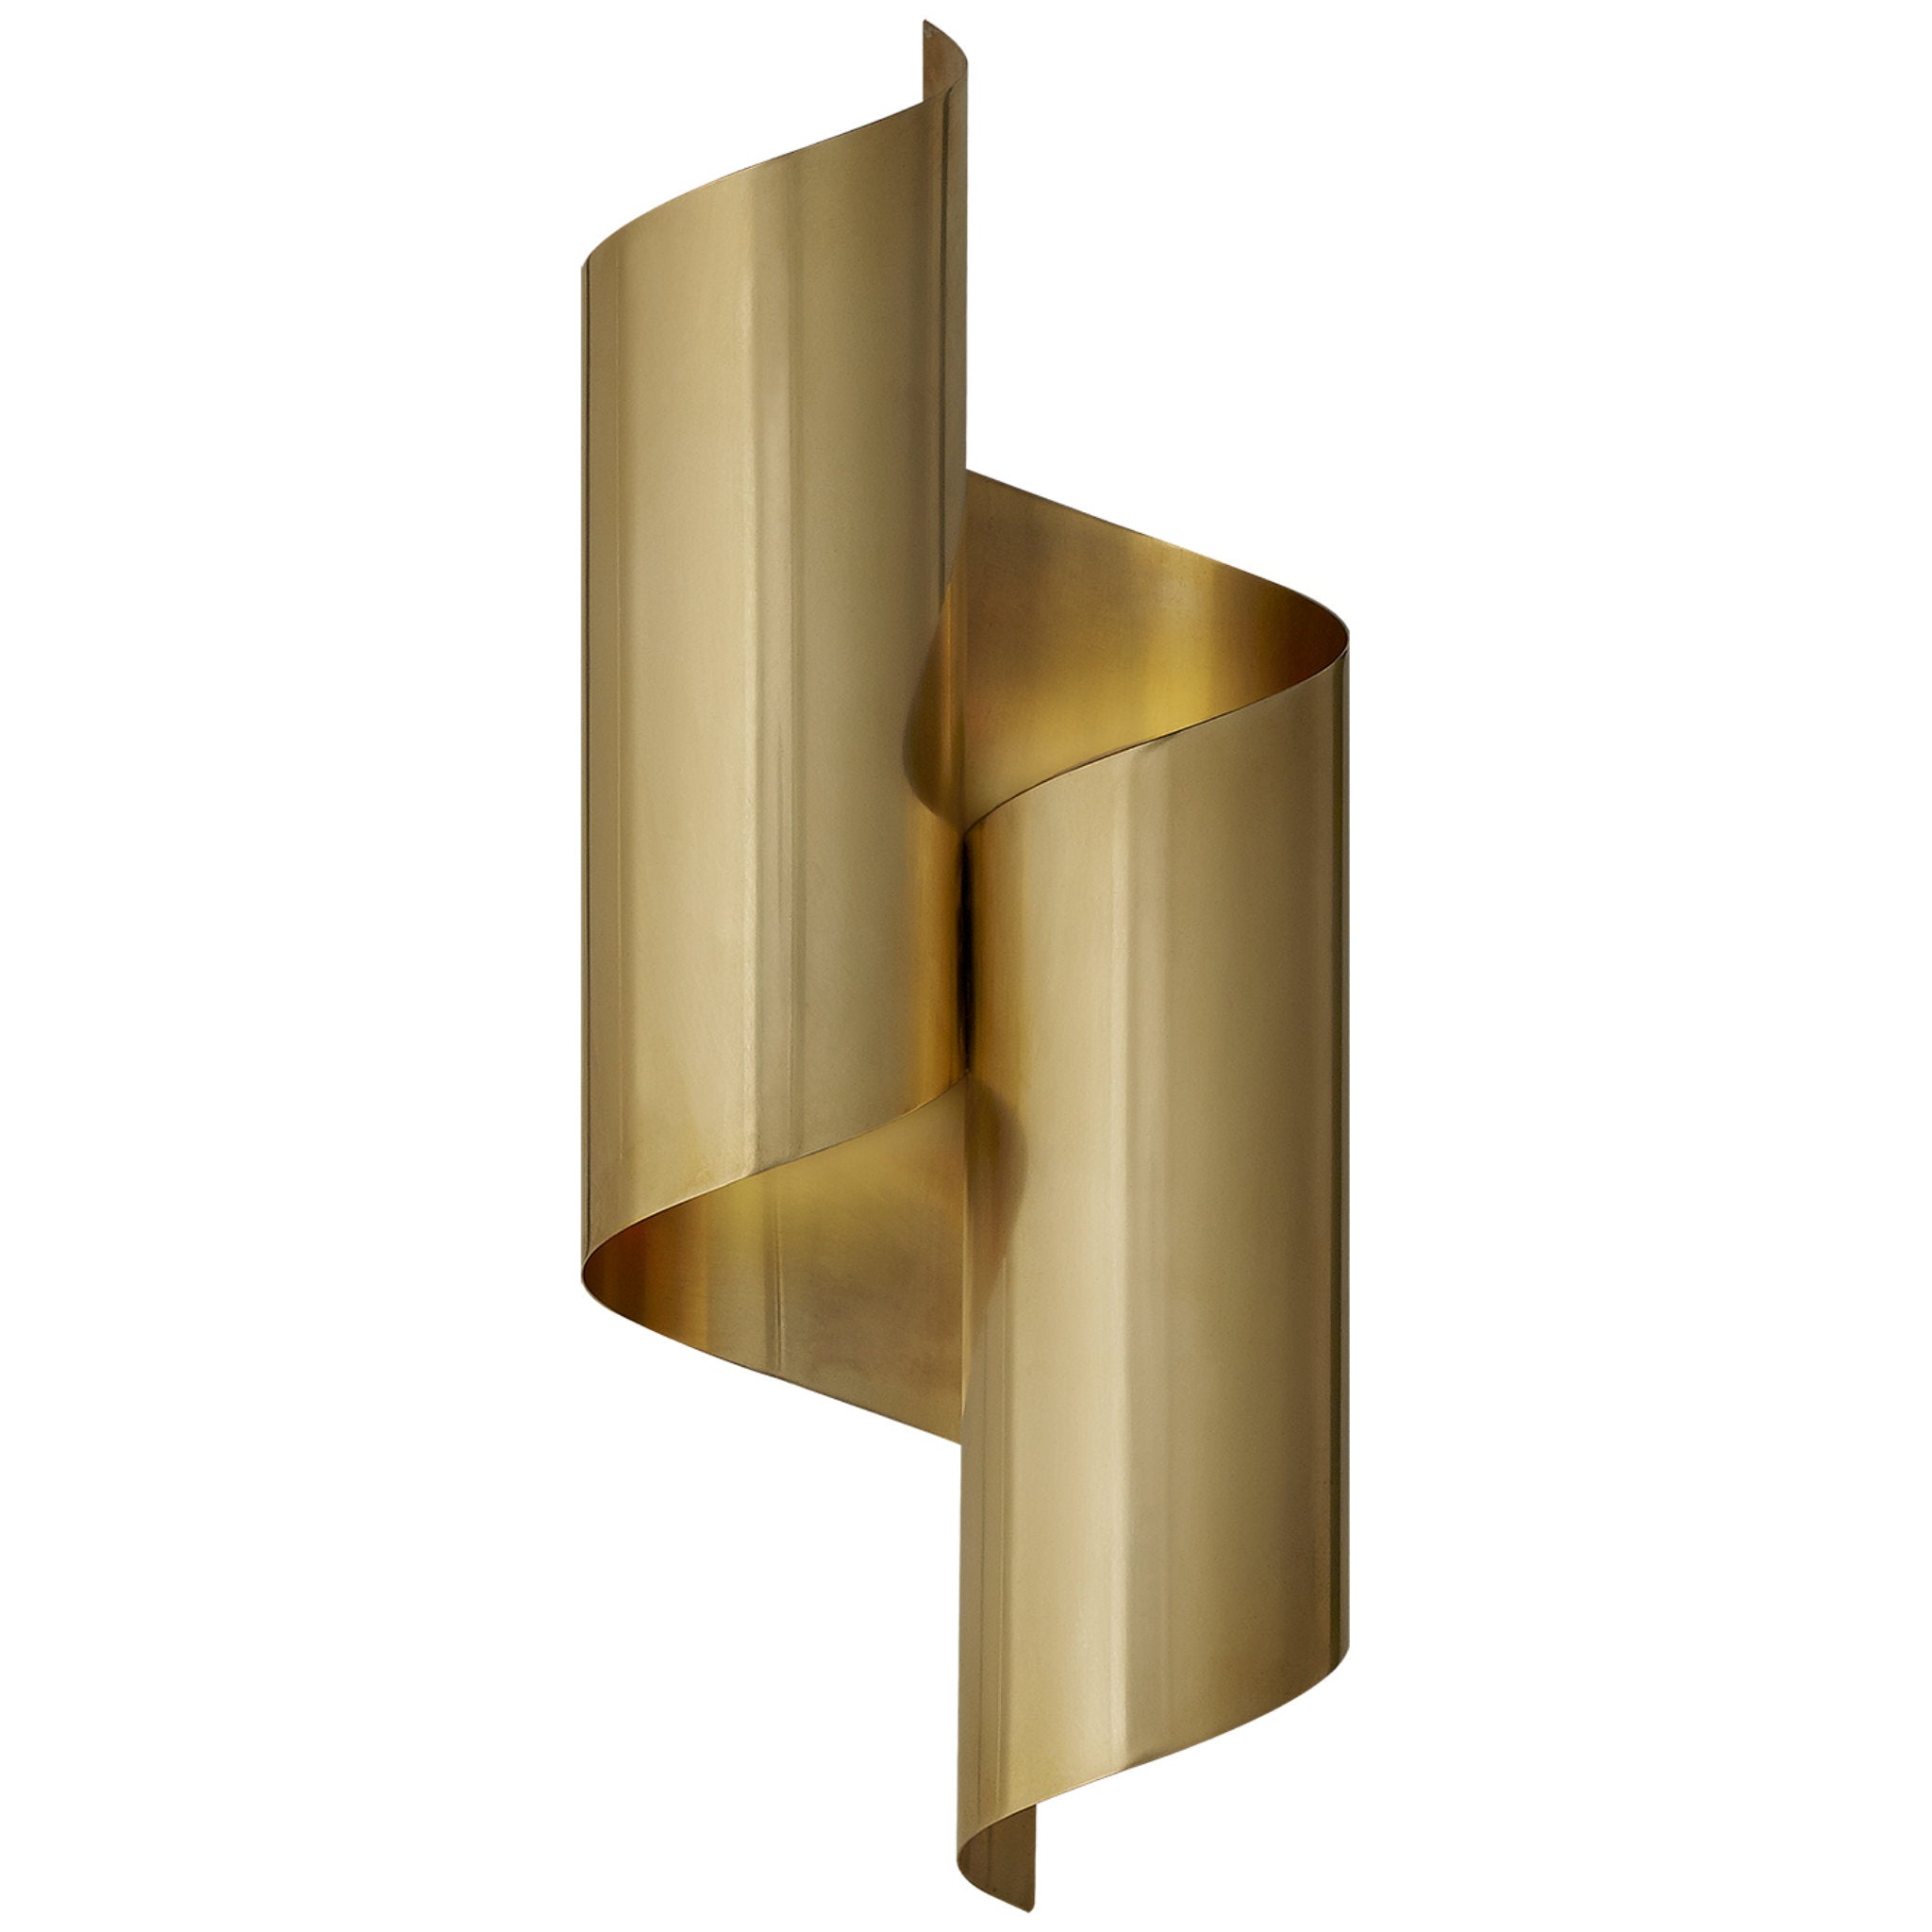 AERIN Iva Medium Wrapped Sconce in Hand-Rubbed Antique Brass